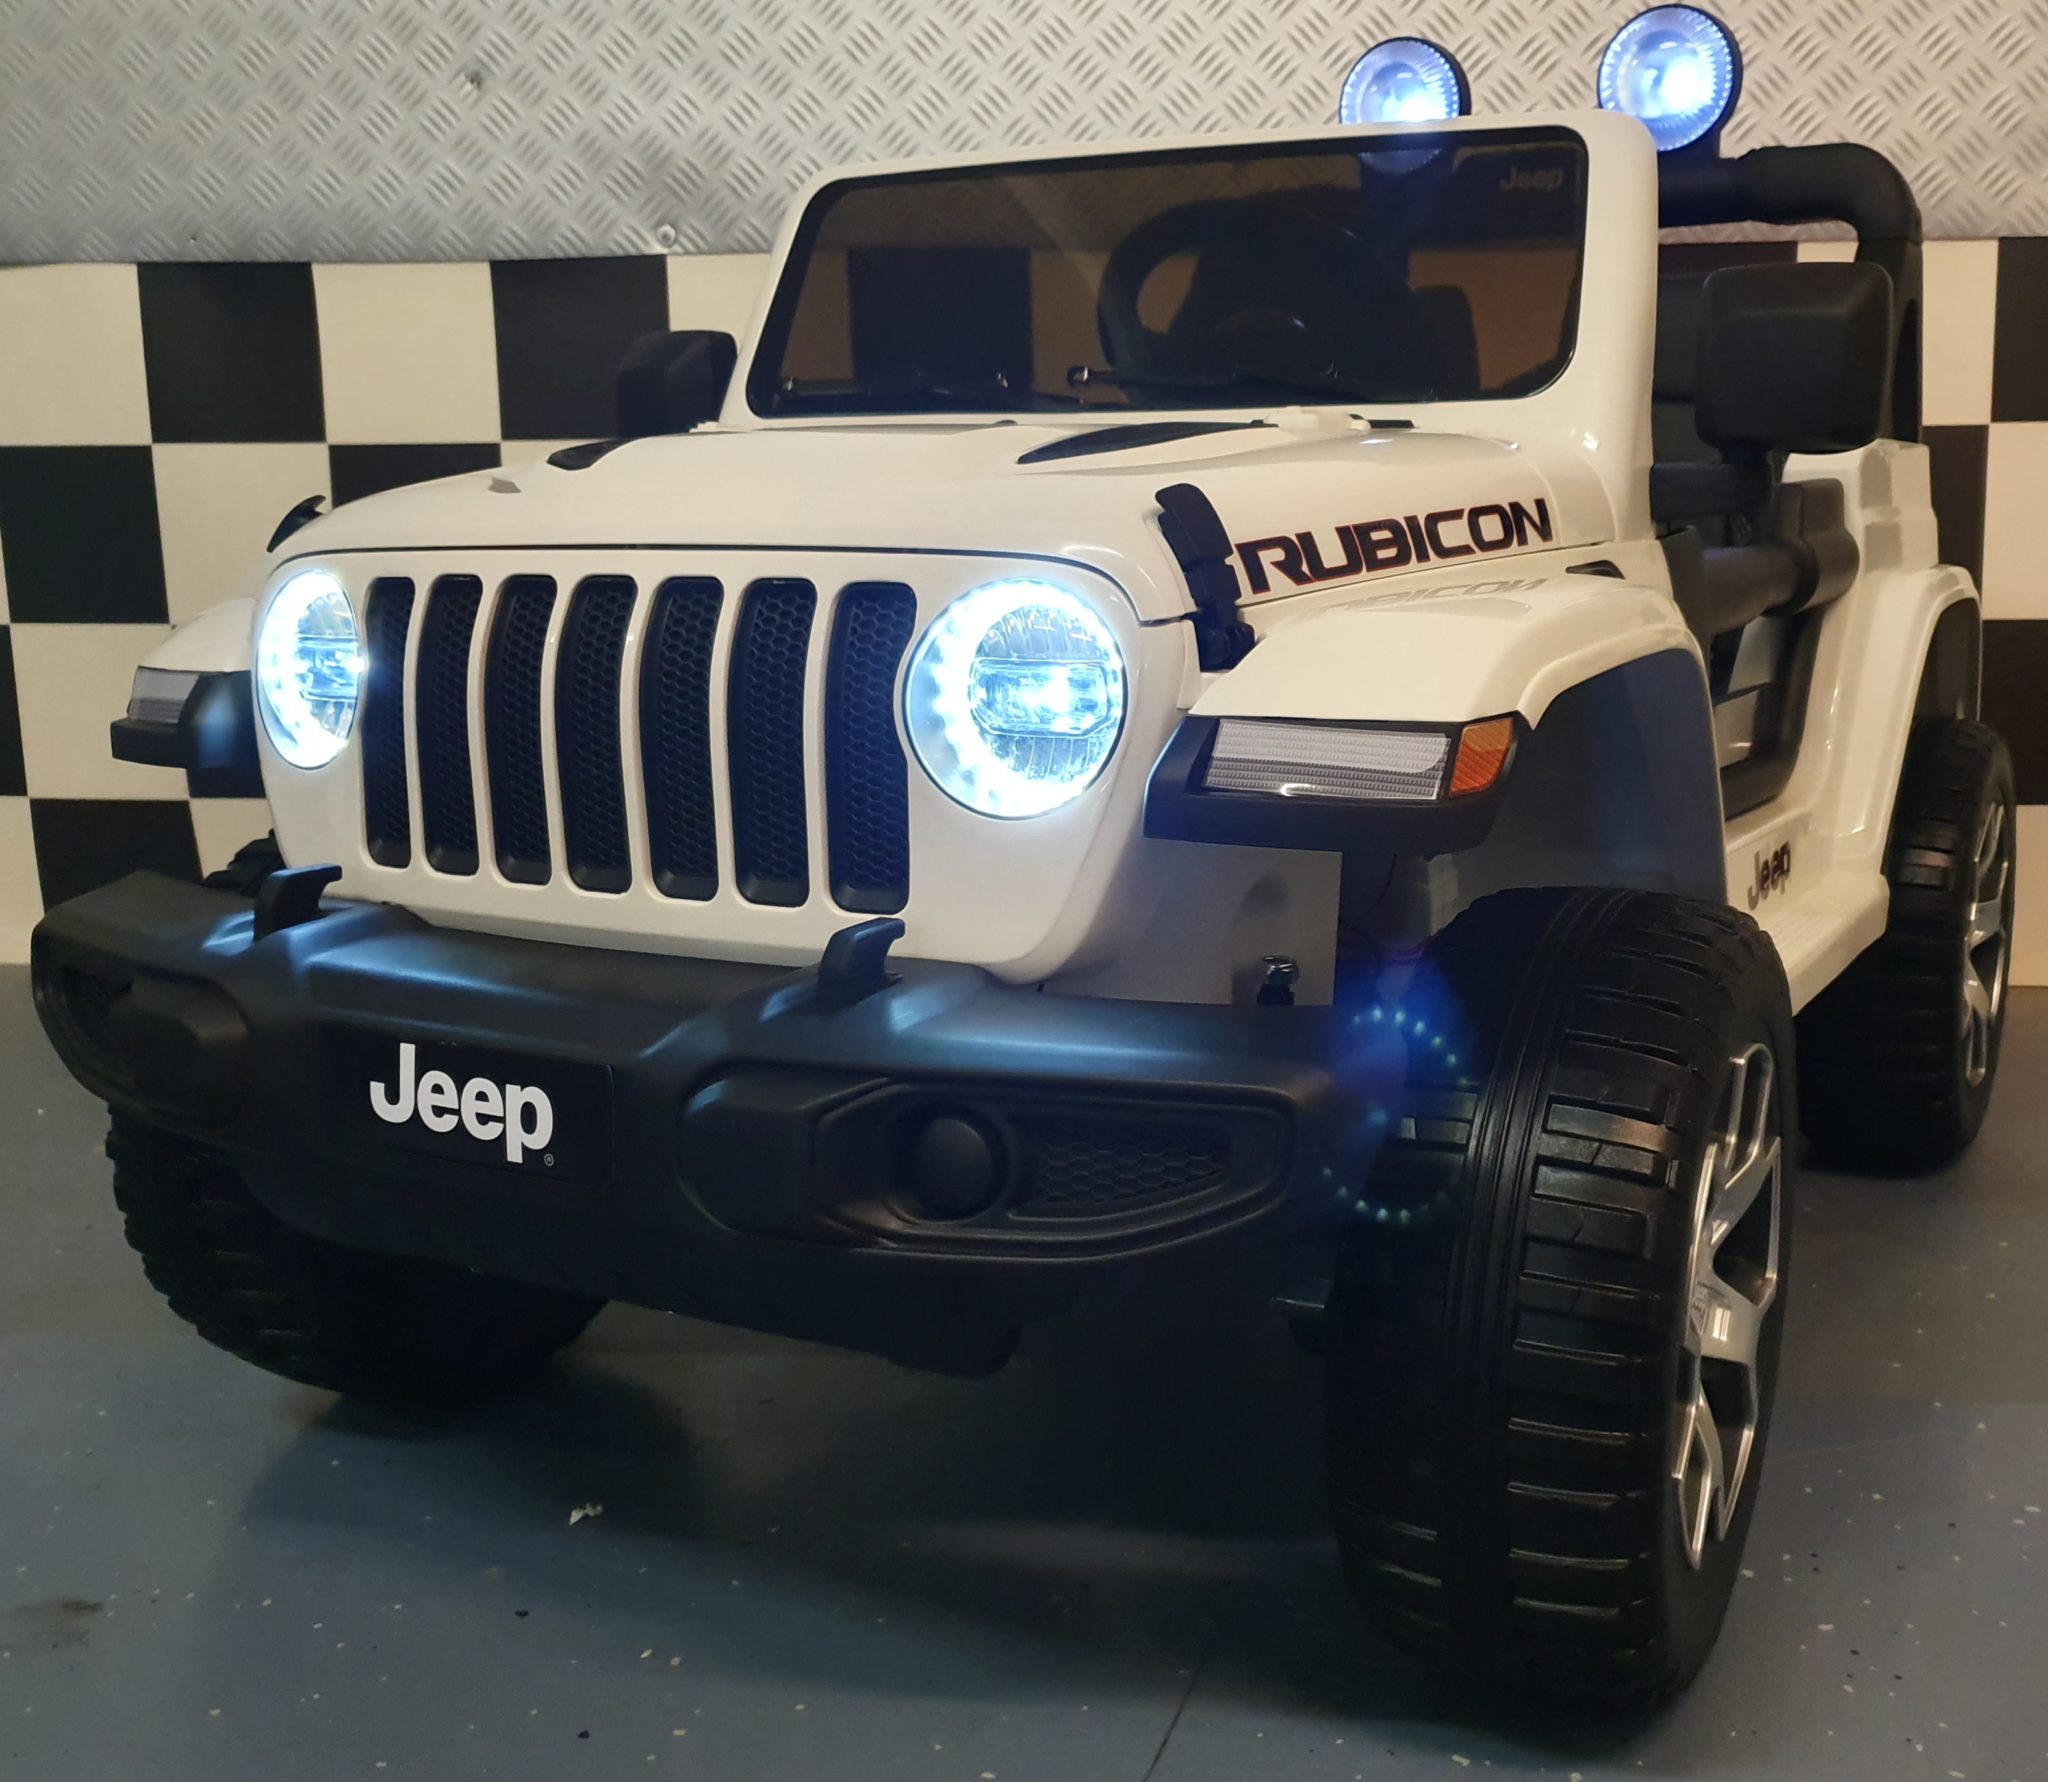 Post impressionisme Aanstellen diagonaal JEEP WRANGLER 1 PERSOONS 4WD | WIT | 12V | 2.4G RC - Kids-Accu Cars